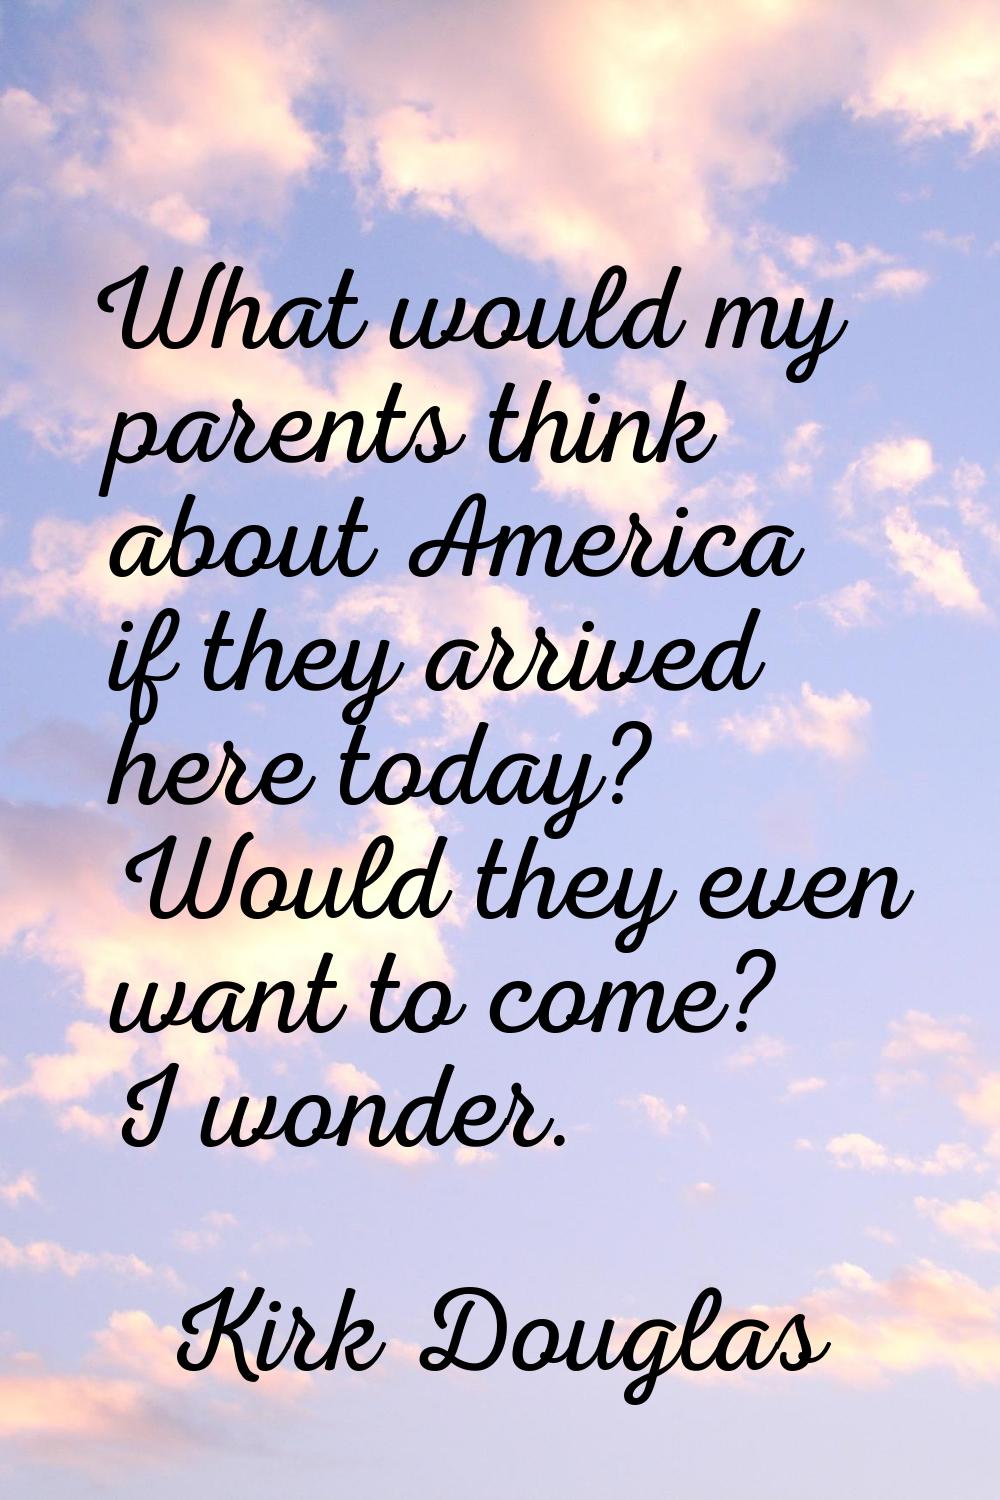 What would my parents think about America if they arrived here today? Would they even want to come?